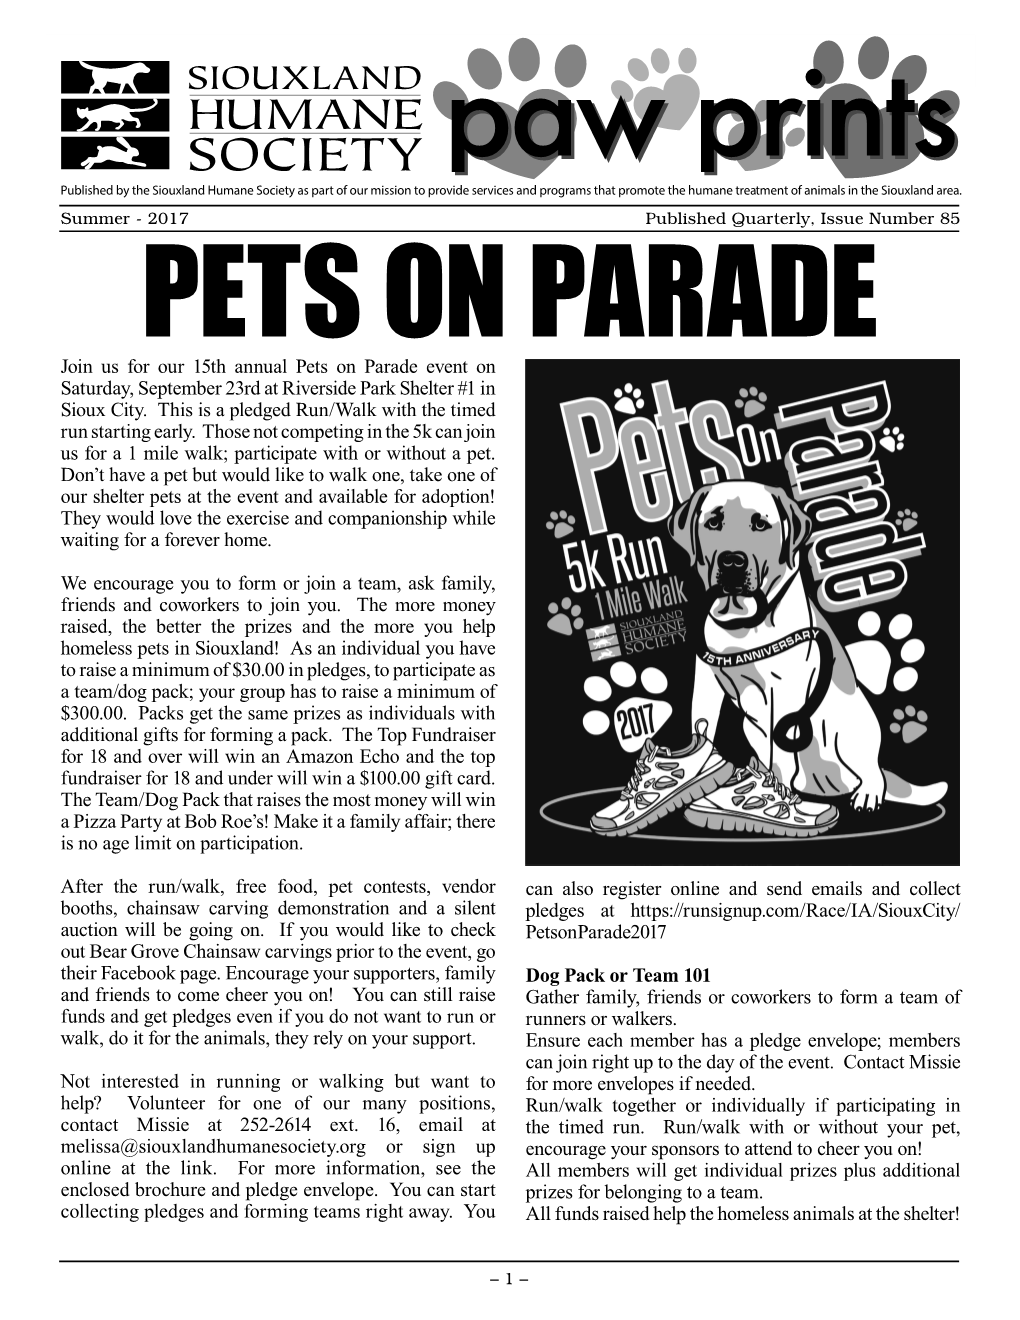 Join Us for Our 15Th Annual Pets on Parade Event on Saturday, September 23Rd at Riverside Park Shelter #1 in Sioux City